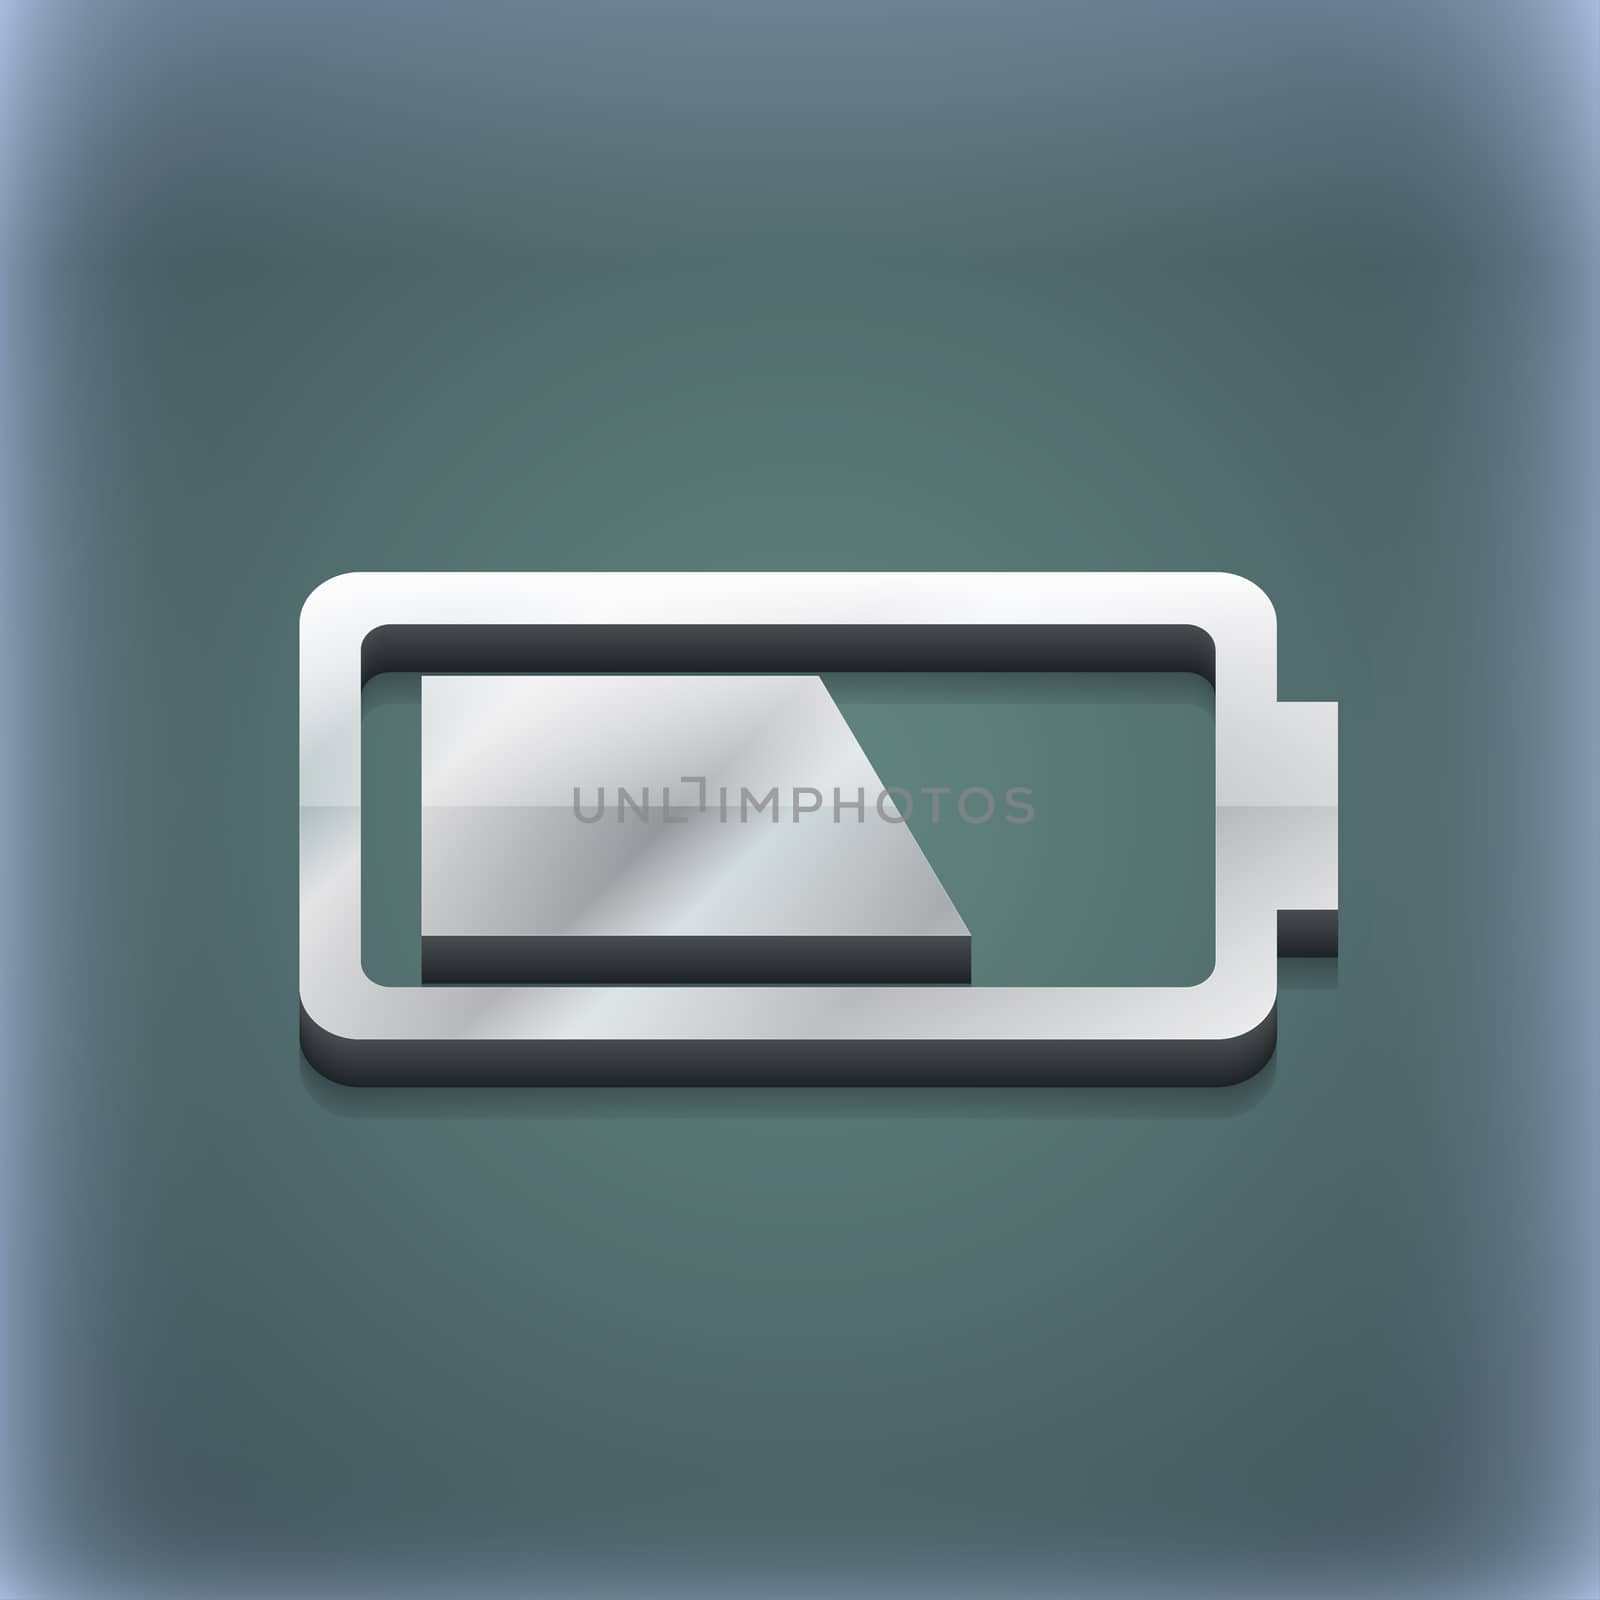 Battery half level icon symbol. 3D style. Trendy, modern design with space for your text illustration. Raster version